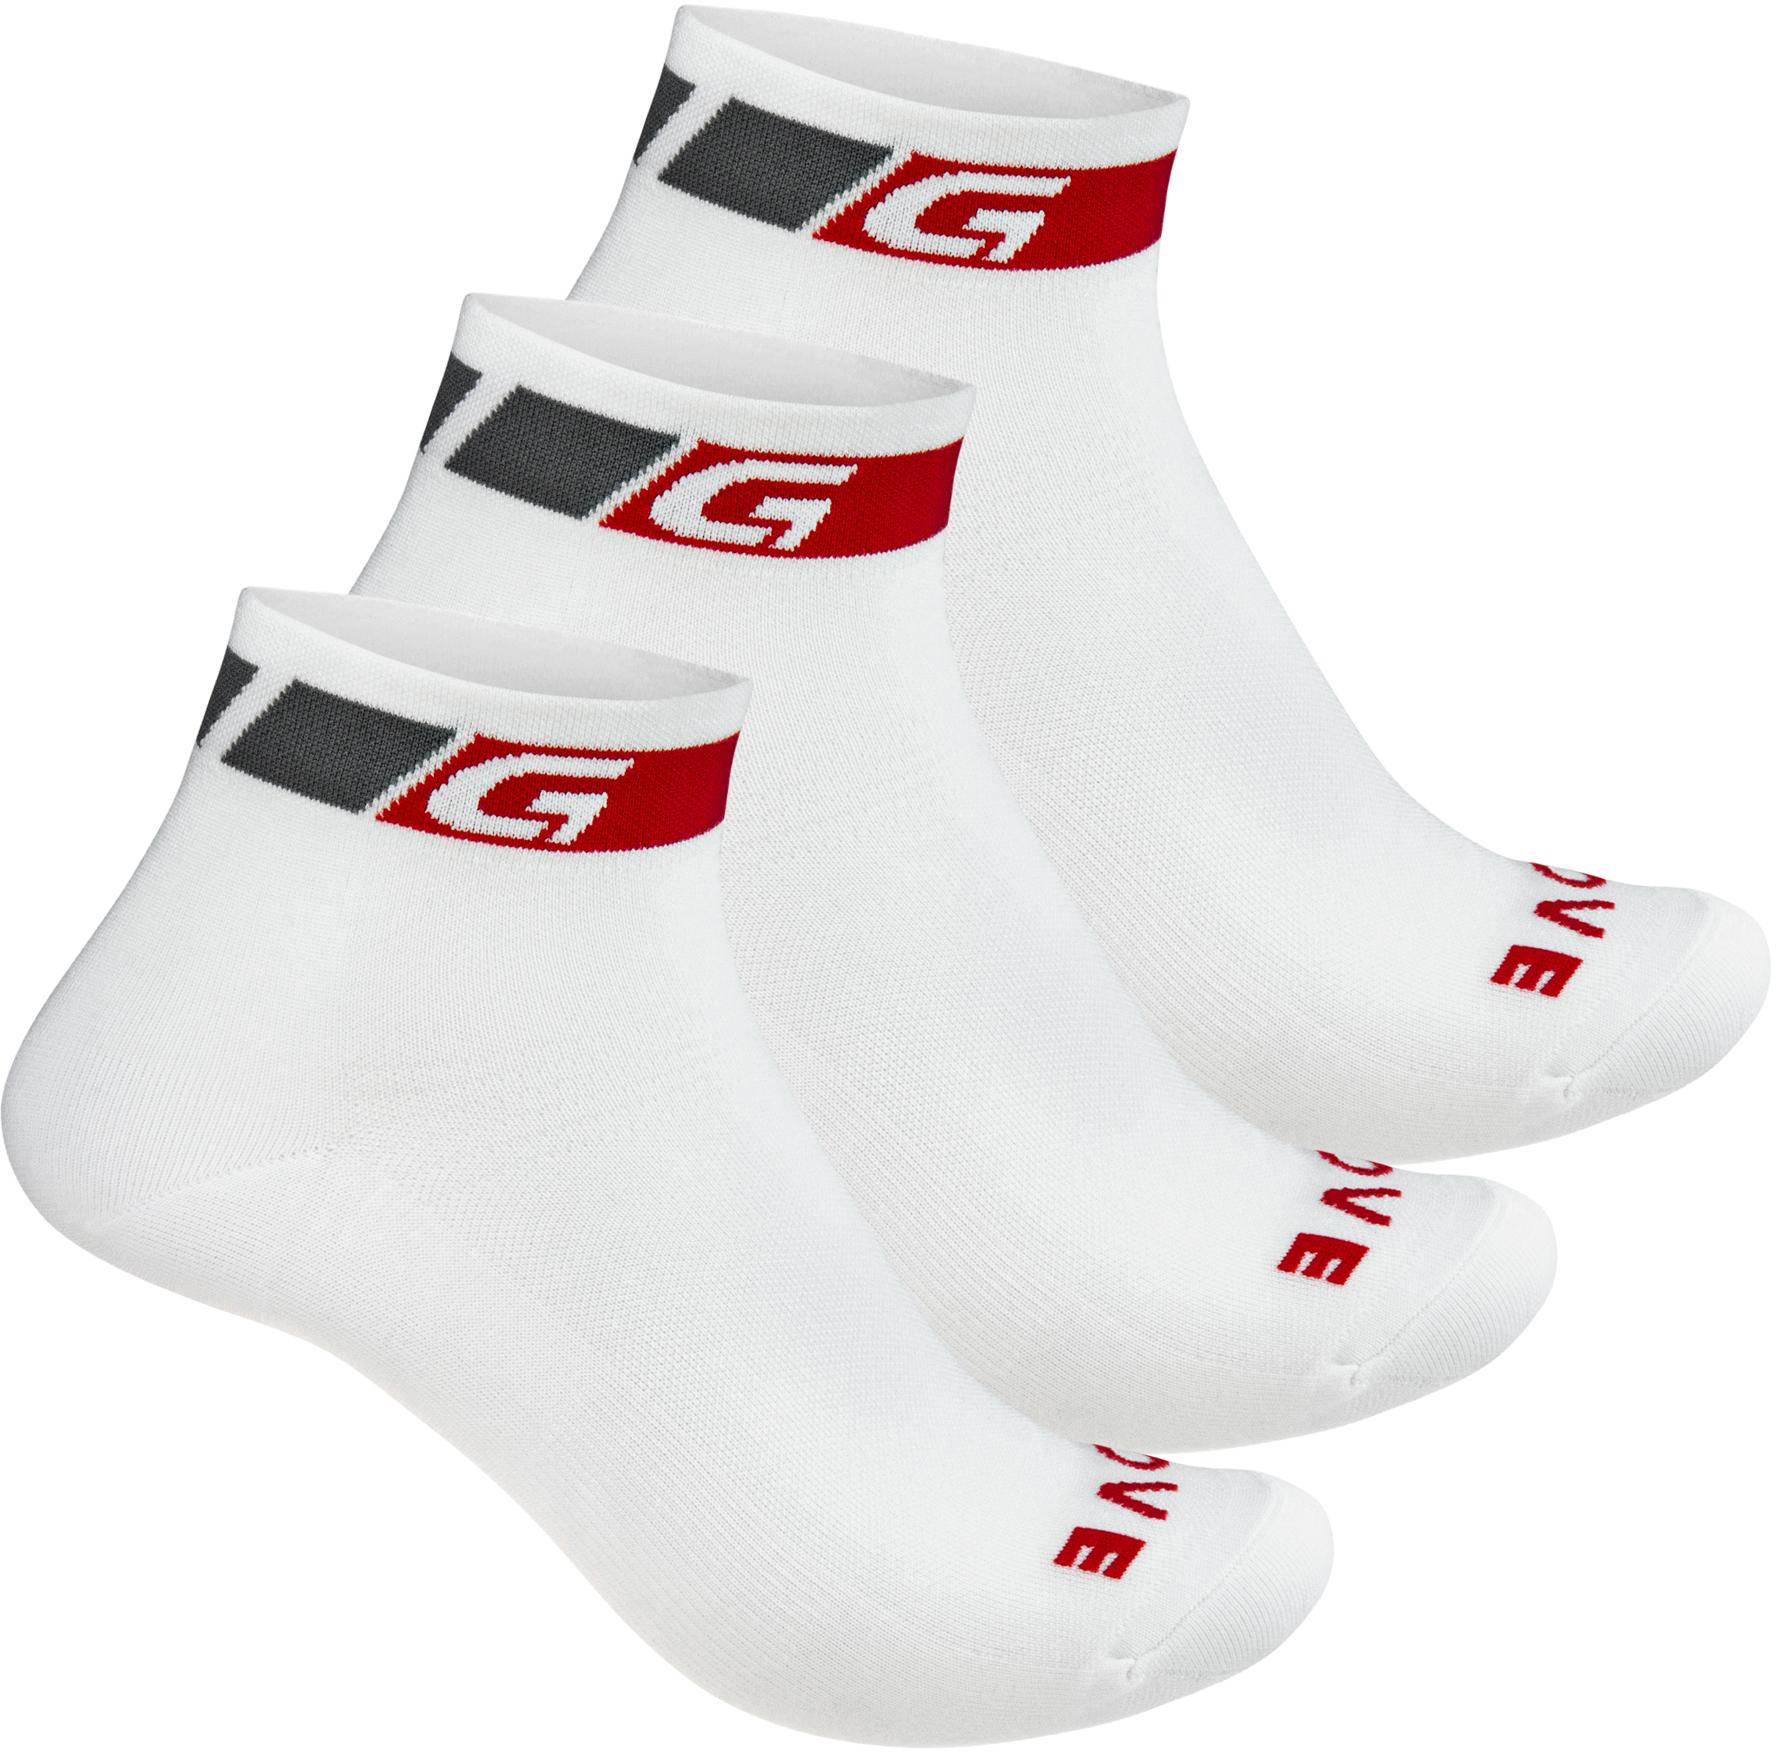 Gripgrab Classic Low Cut Sock 3pack  White